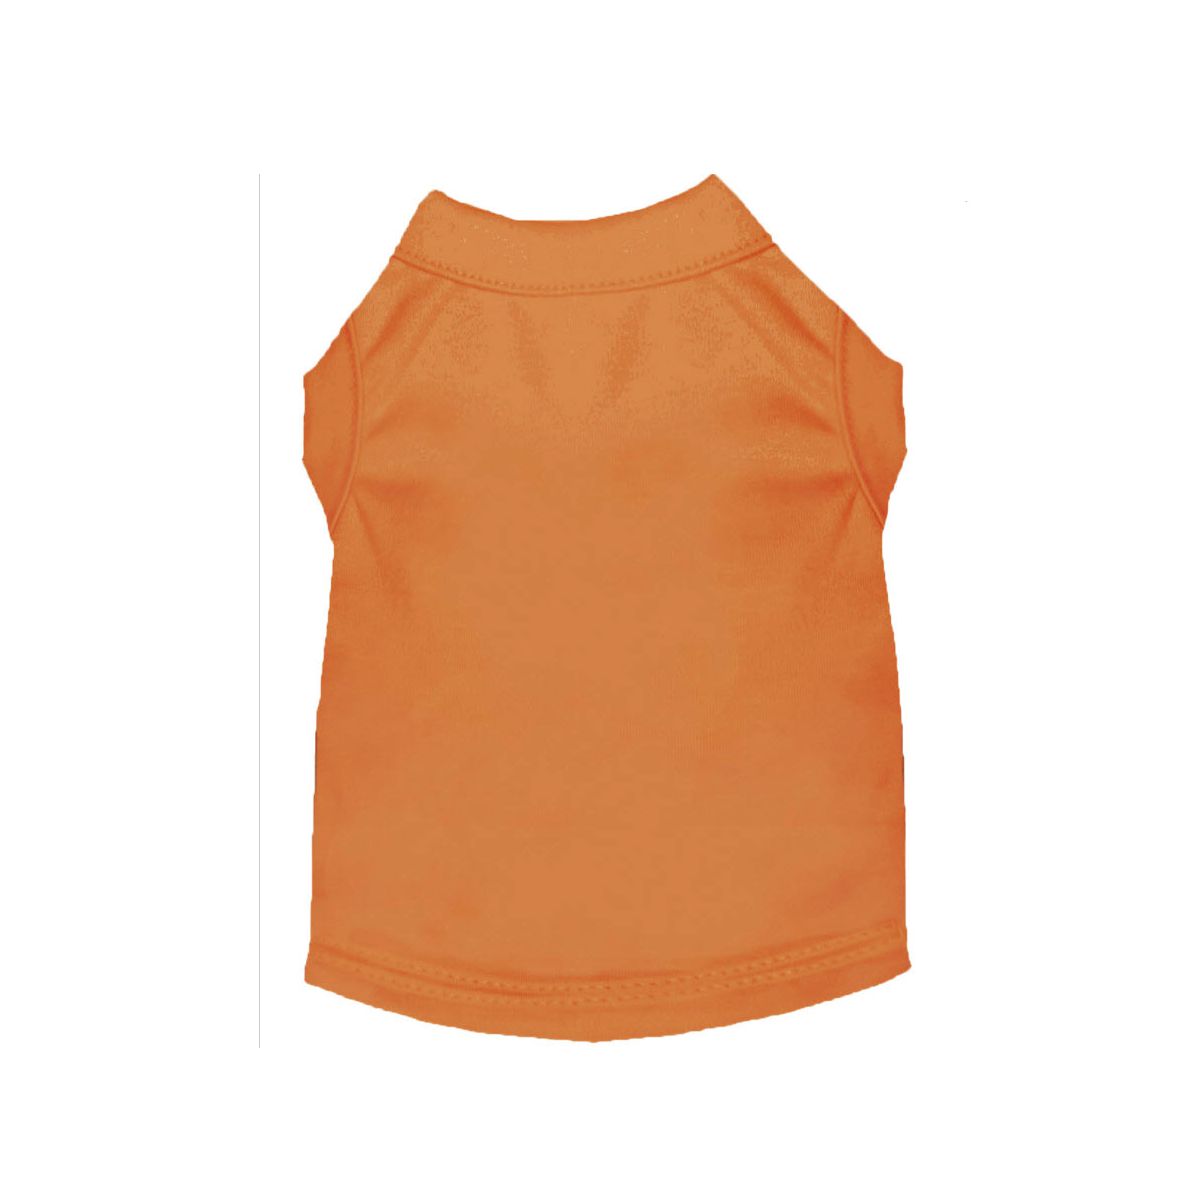 Cotton Poly Blend Tee Shirt in Orange | Pawlicious & Company